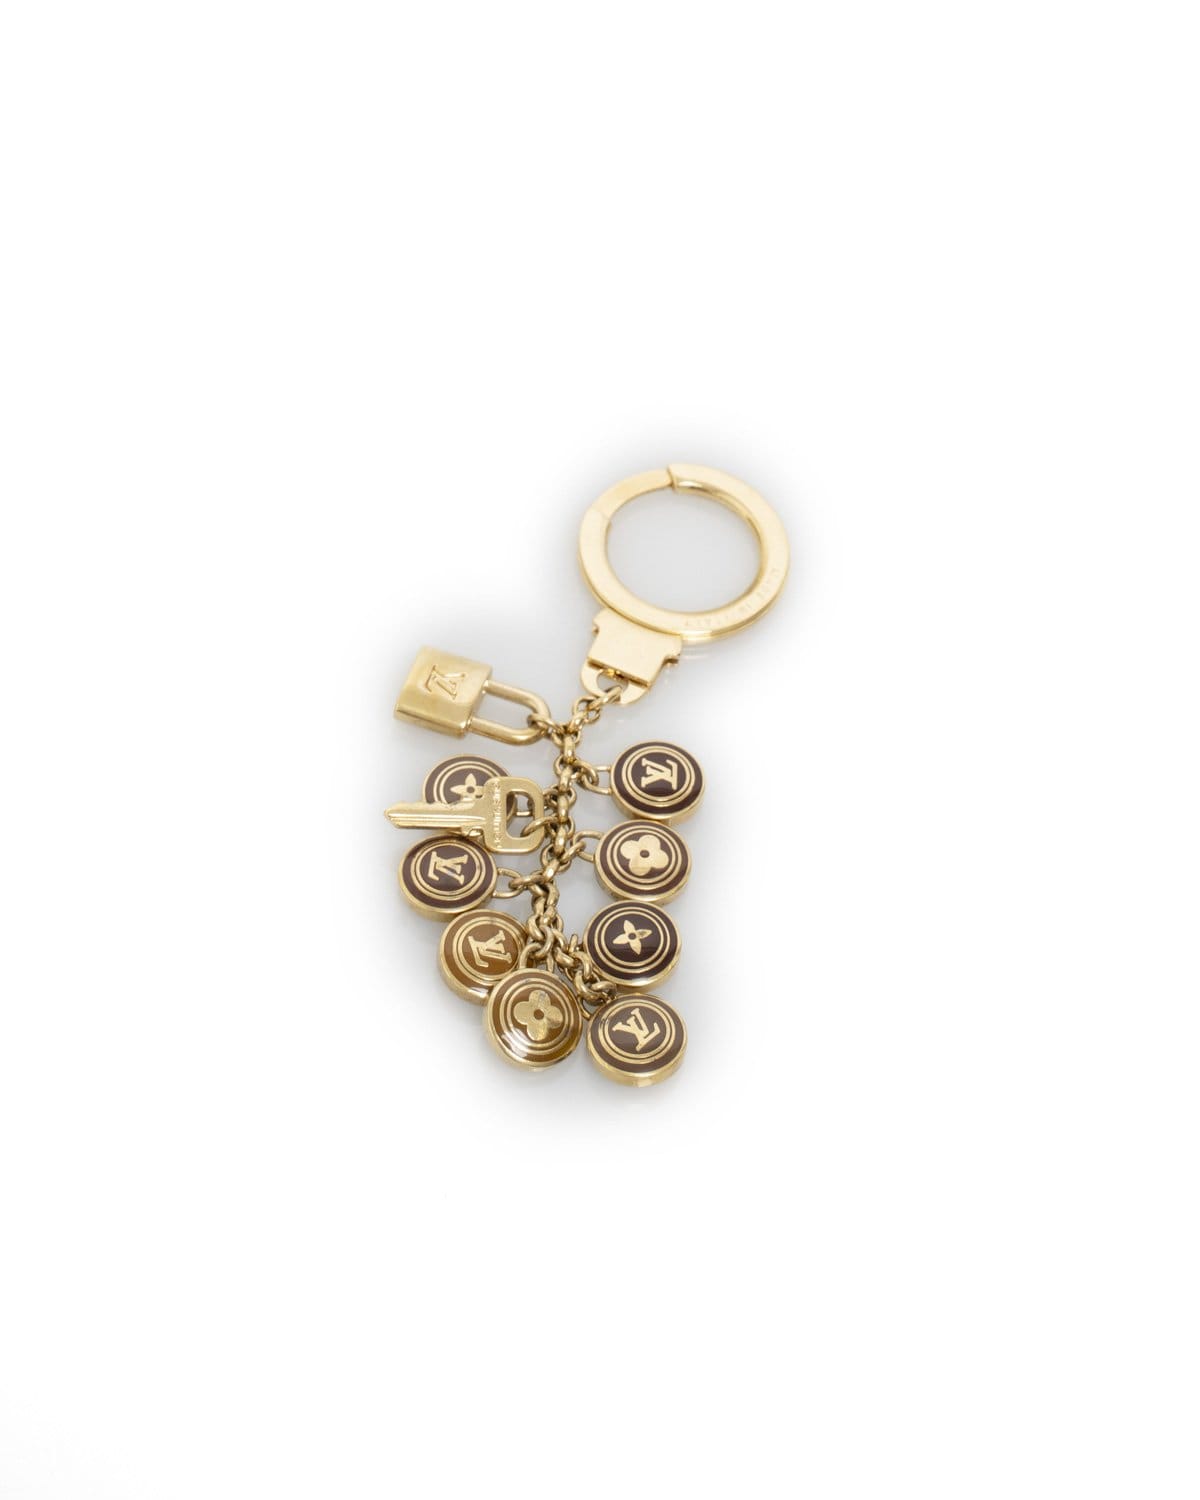 LuxuryPromise Louis Vuitton Mini Disc and Padlock and Key Bag Charm and Key Holder - AWL1758